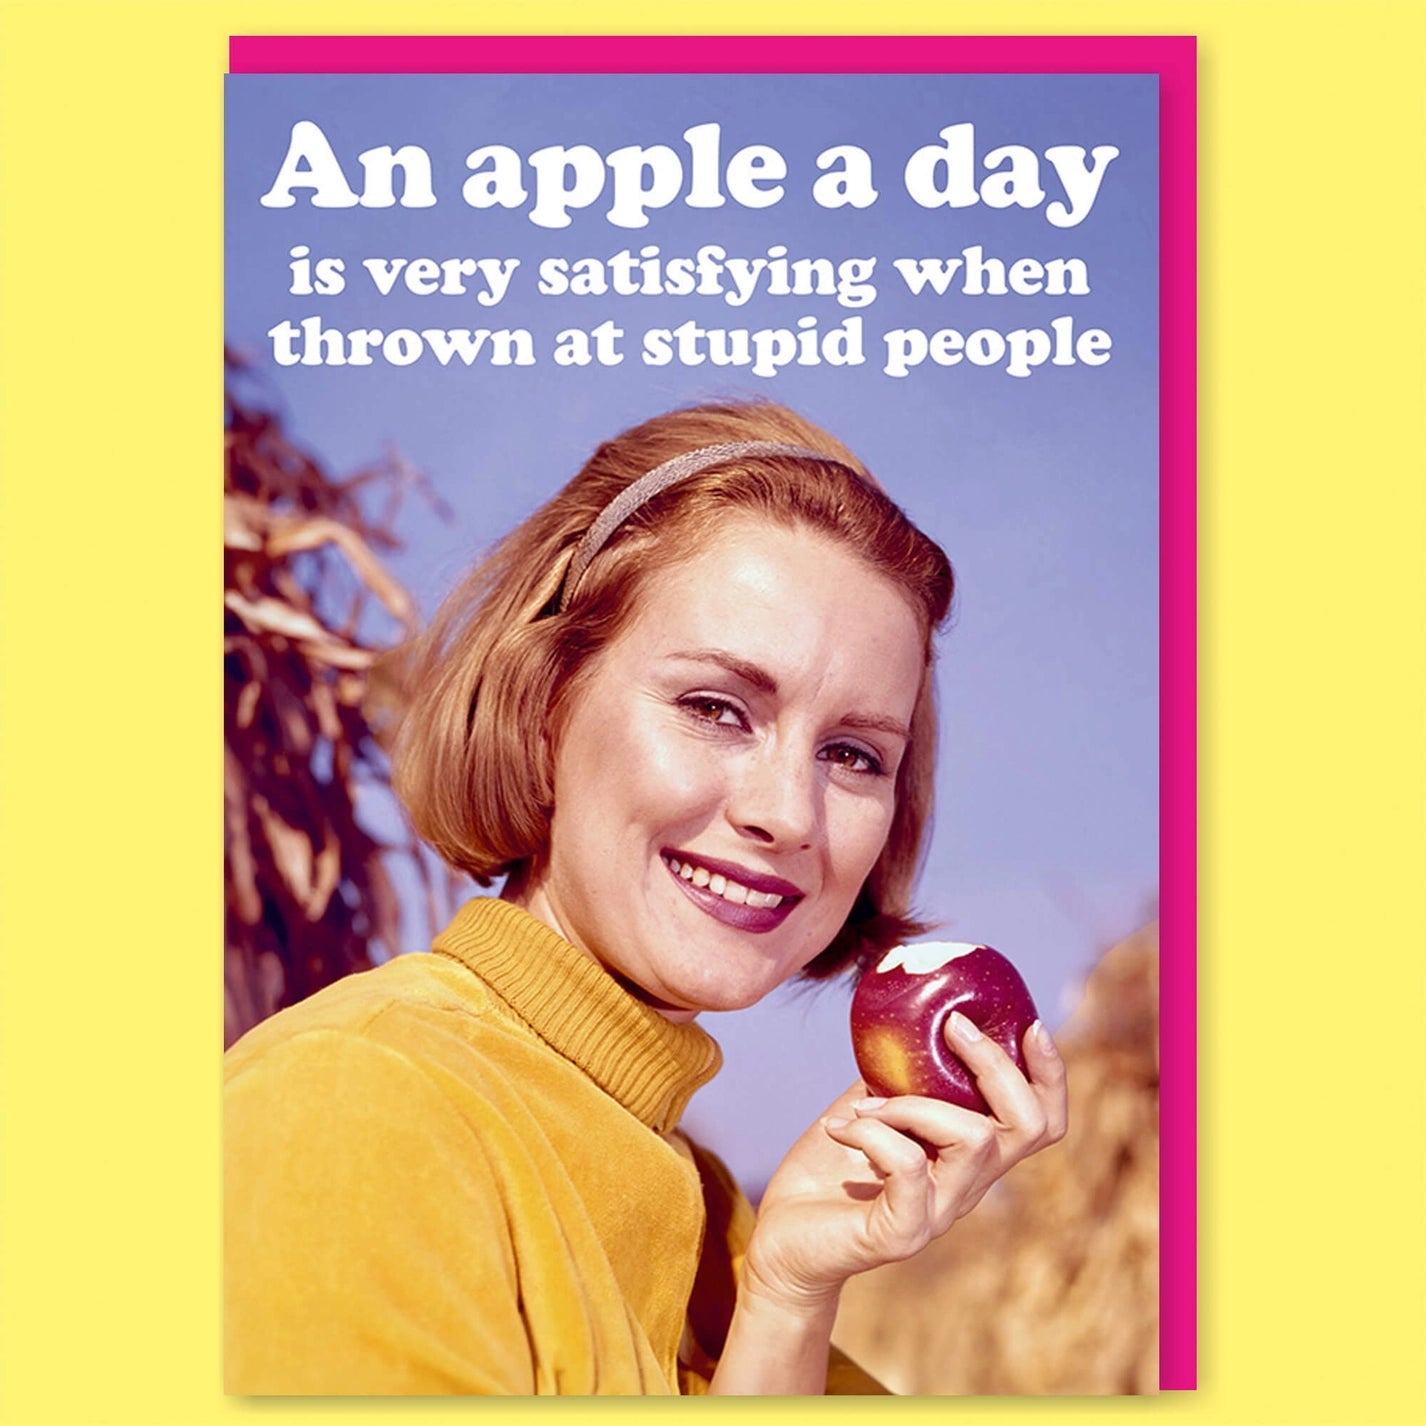 An Apple A Day Is Very Satisfying When Thrown at Stupid People Greeting Card